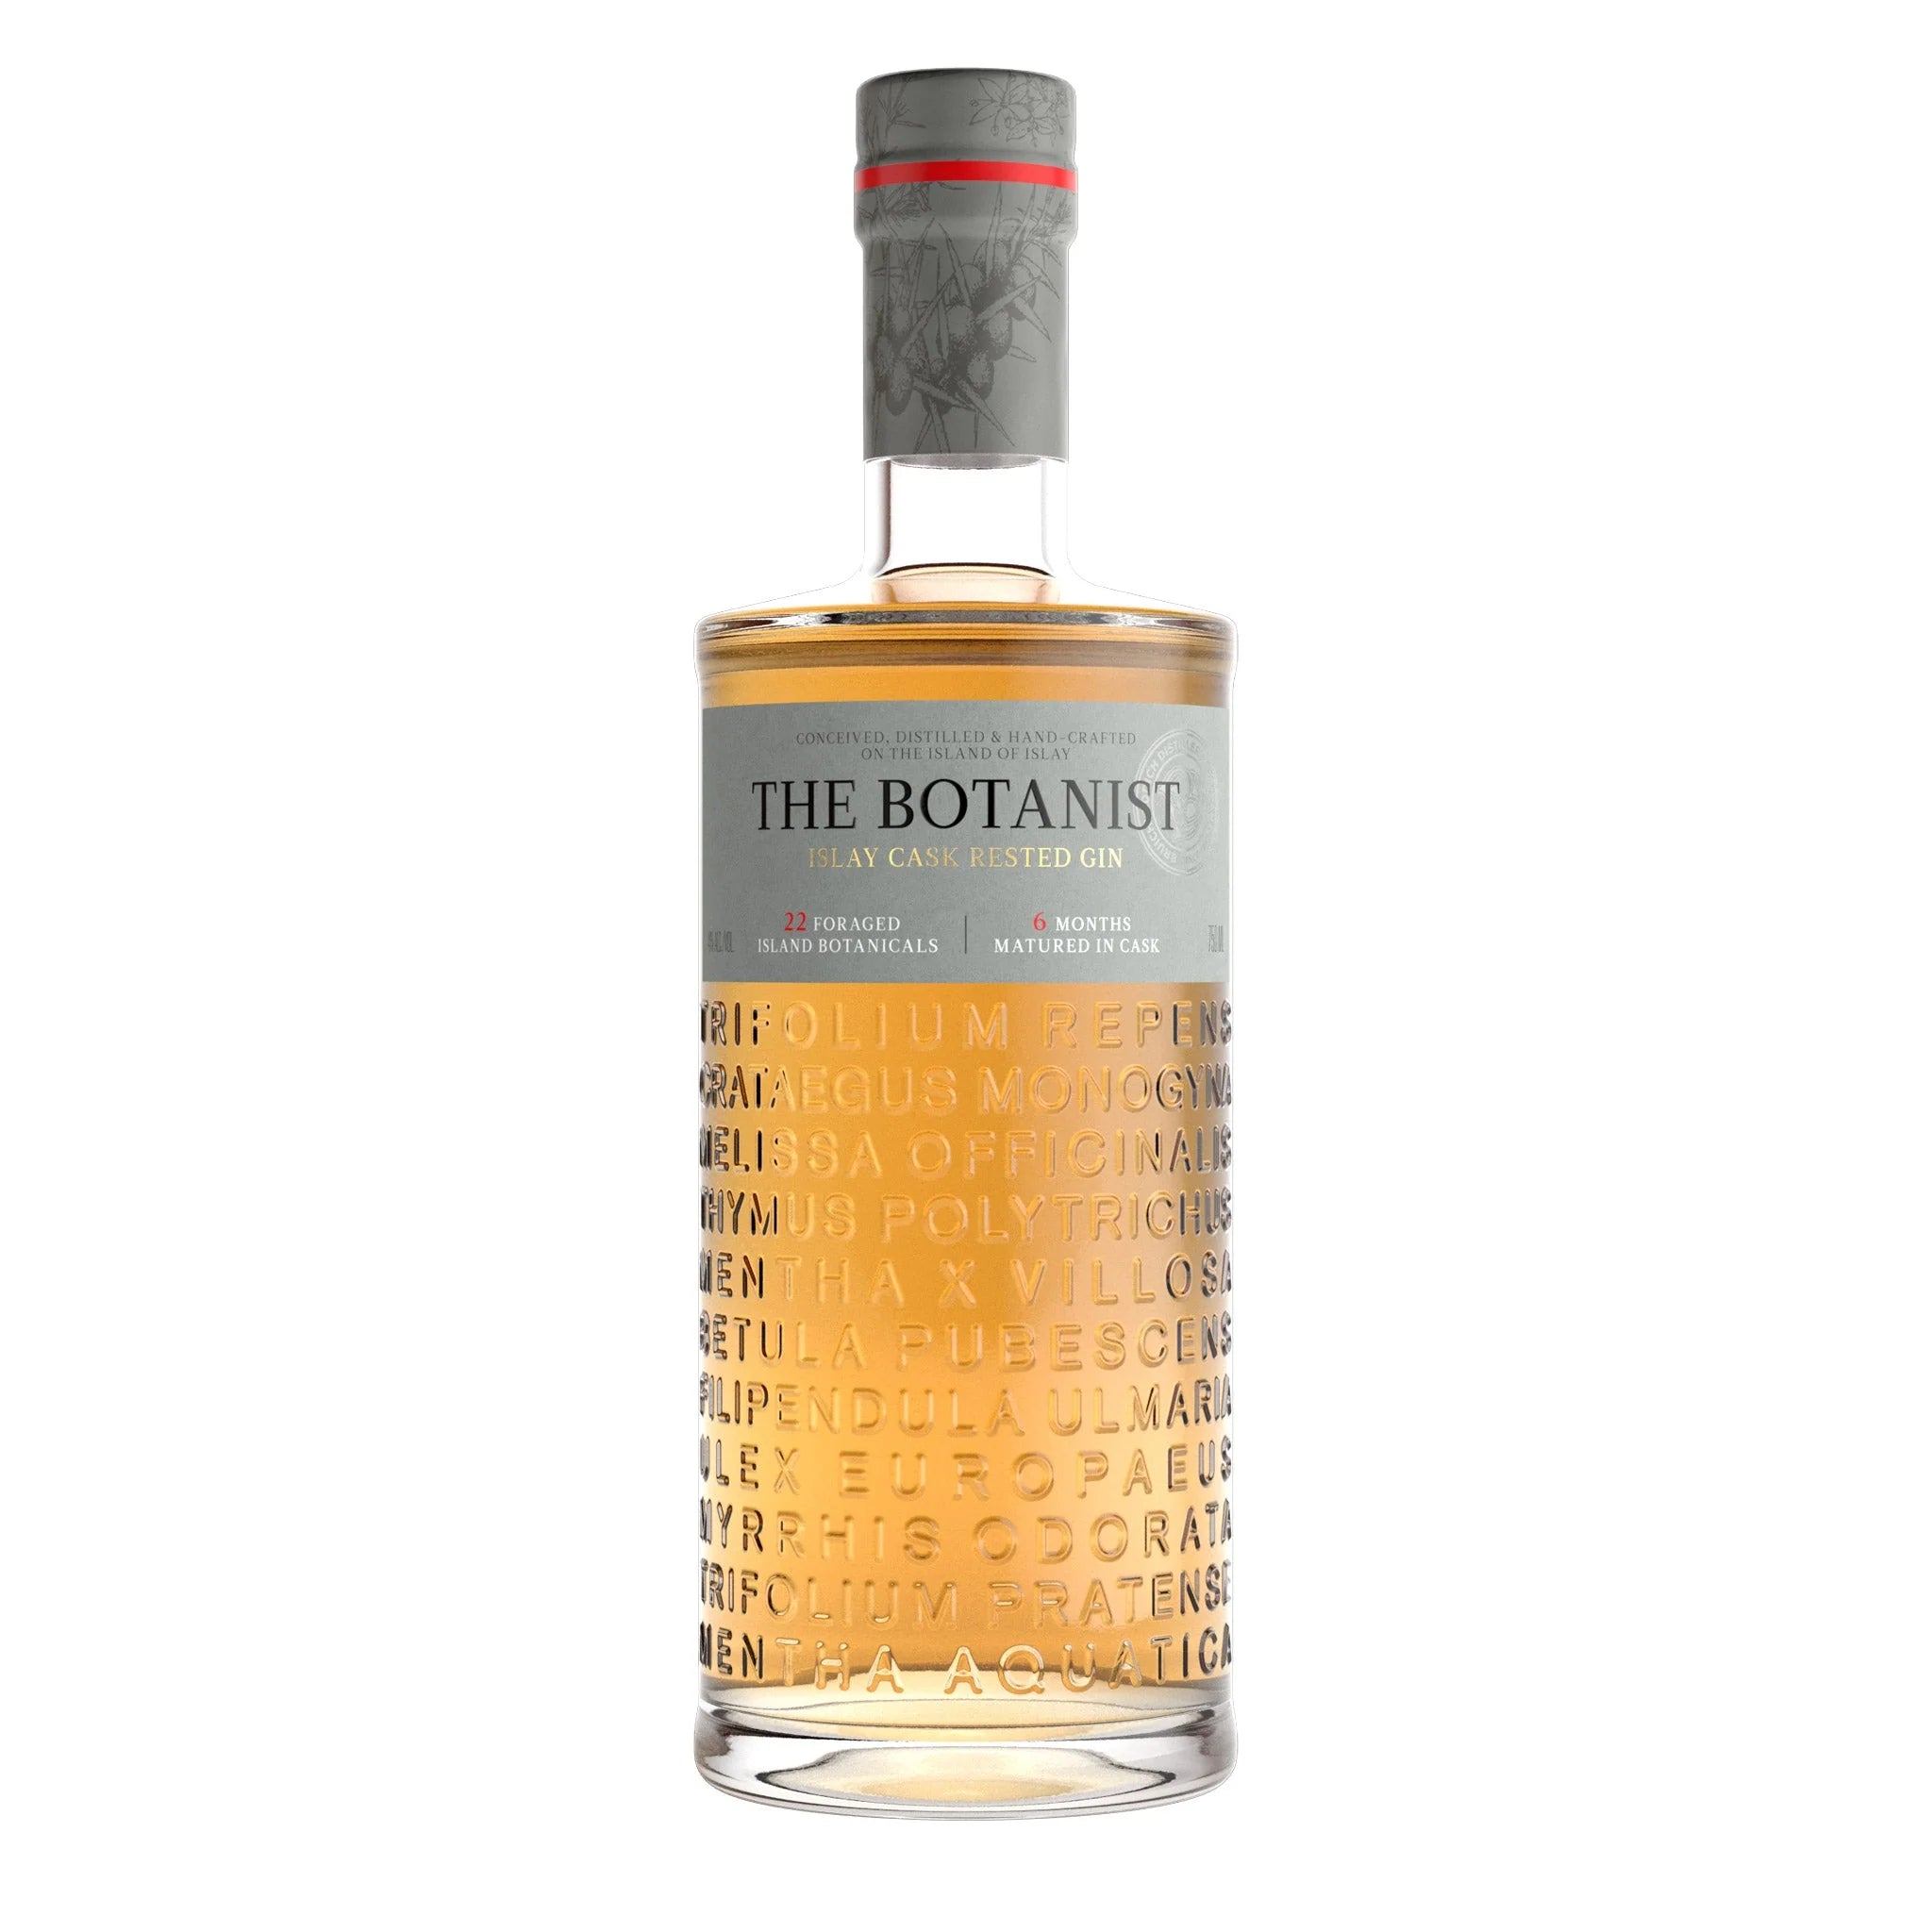 The Botanist Islay Cask Rested Gin